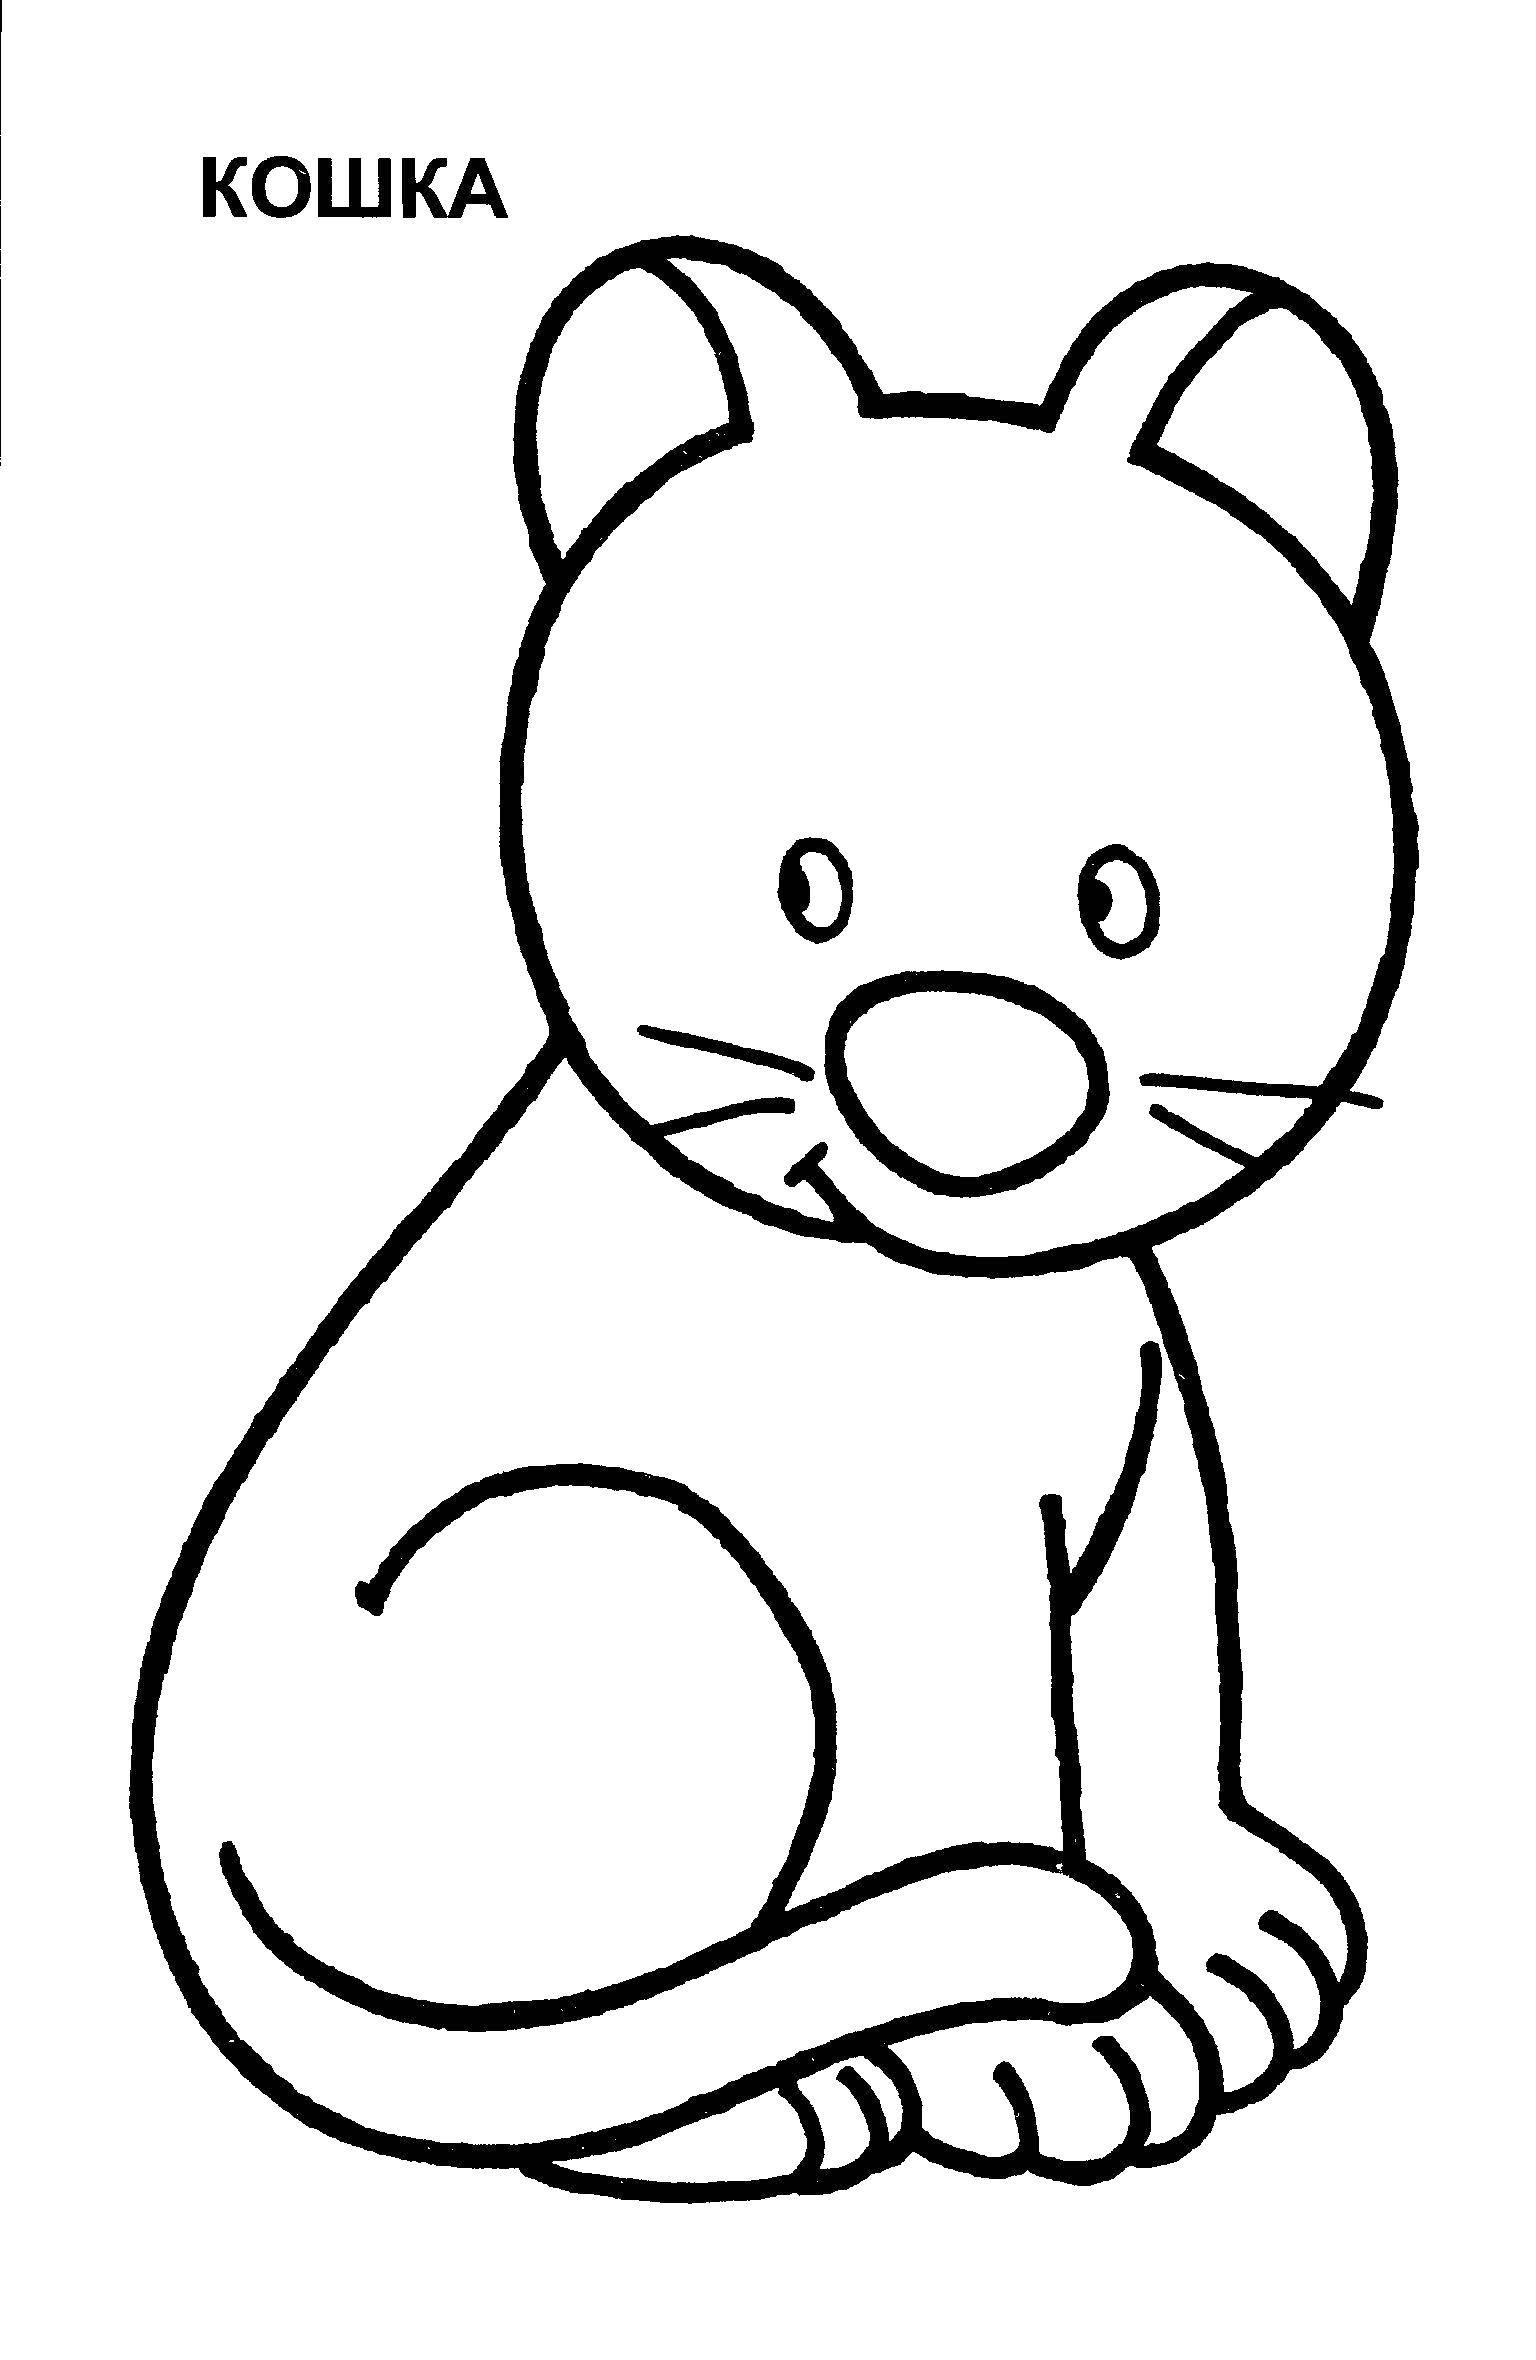 Coloring Cat. Category Coloring pages for kids. Tags:  the cat.